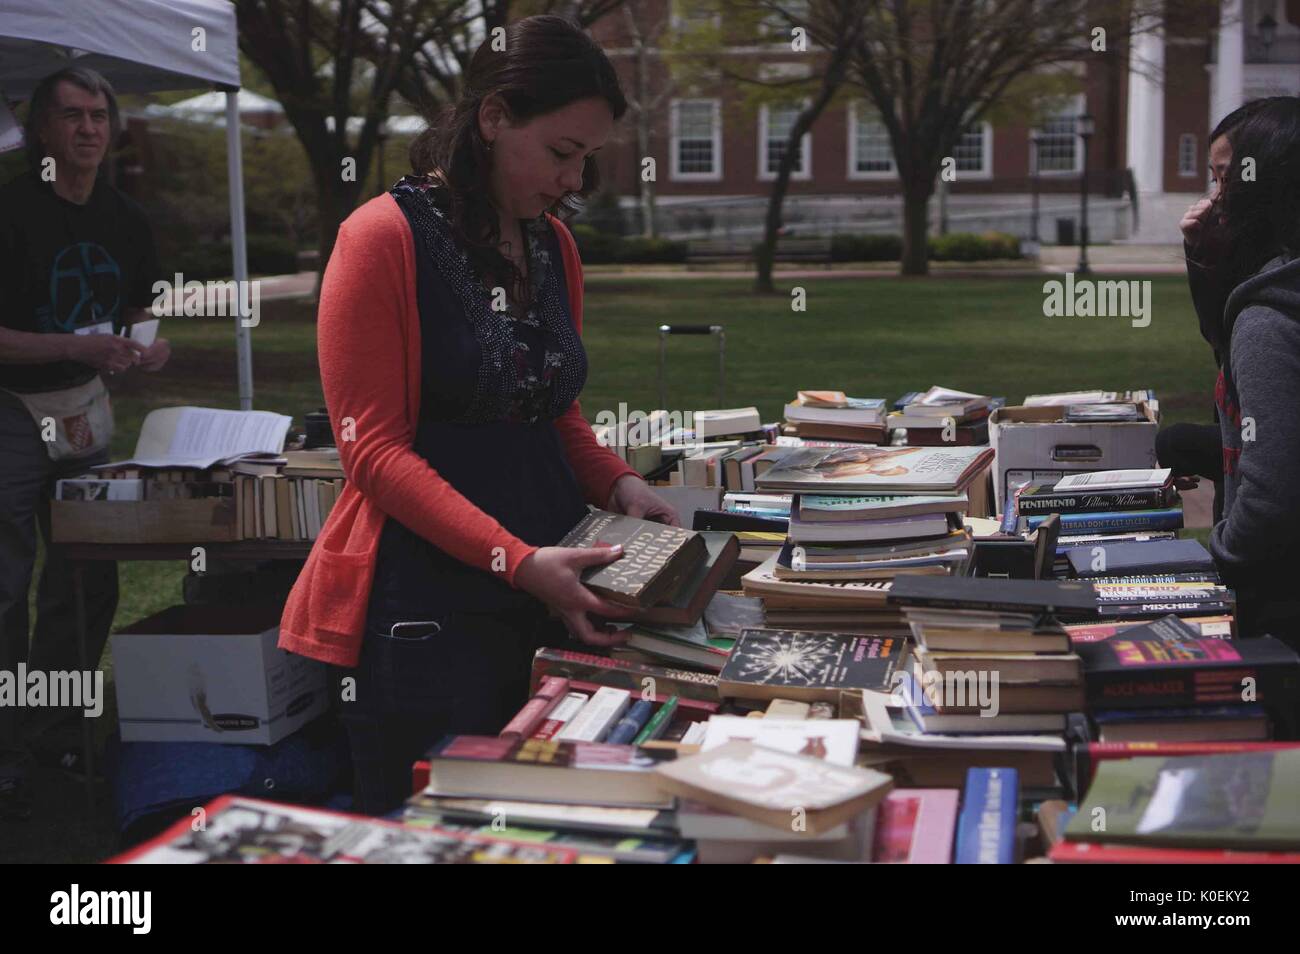 College students and members of the Johns Hopkins and Baltimore communities look through books that have been set up by a vendor for Spring Fair, an annual festival with music, food, shopping, and more that takes place every spring on the Homewood campus of the Johns Hopkins University in Baltimore, Maryland, April, 2014. Courtesy Eric Chen. Stock Photo